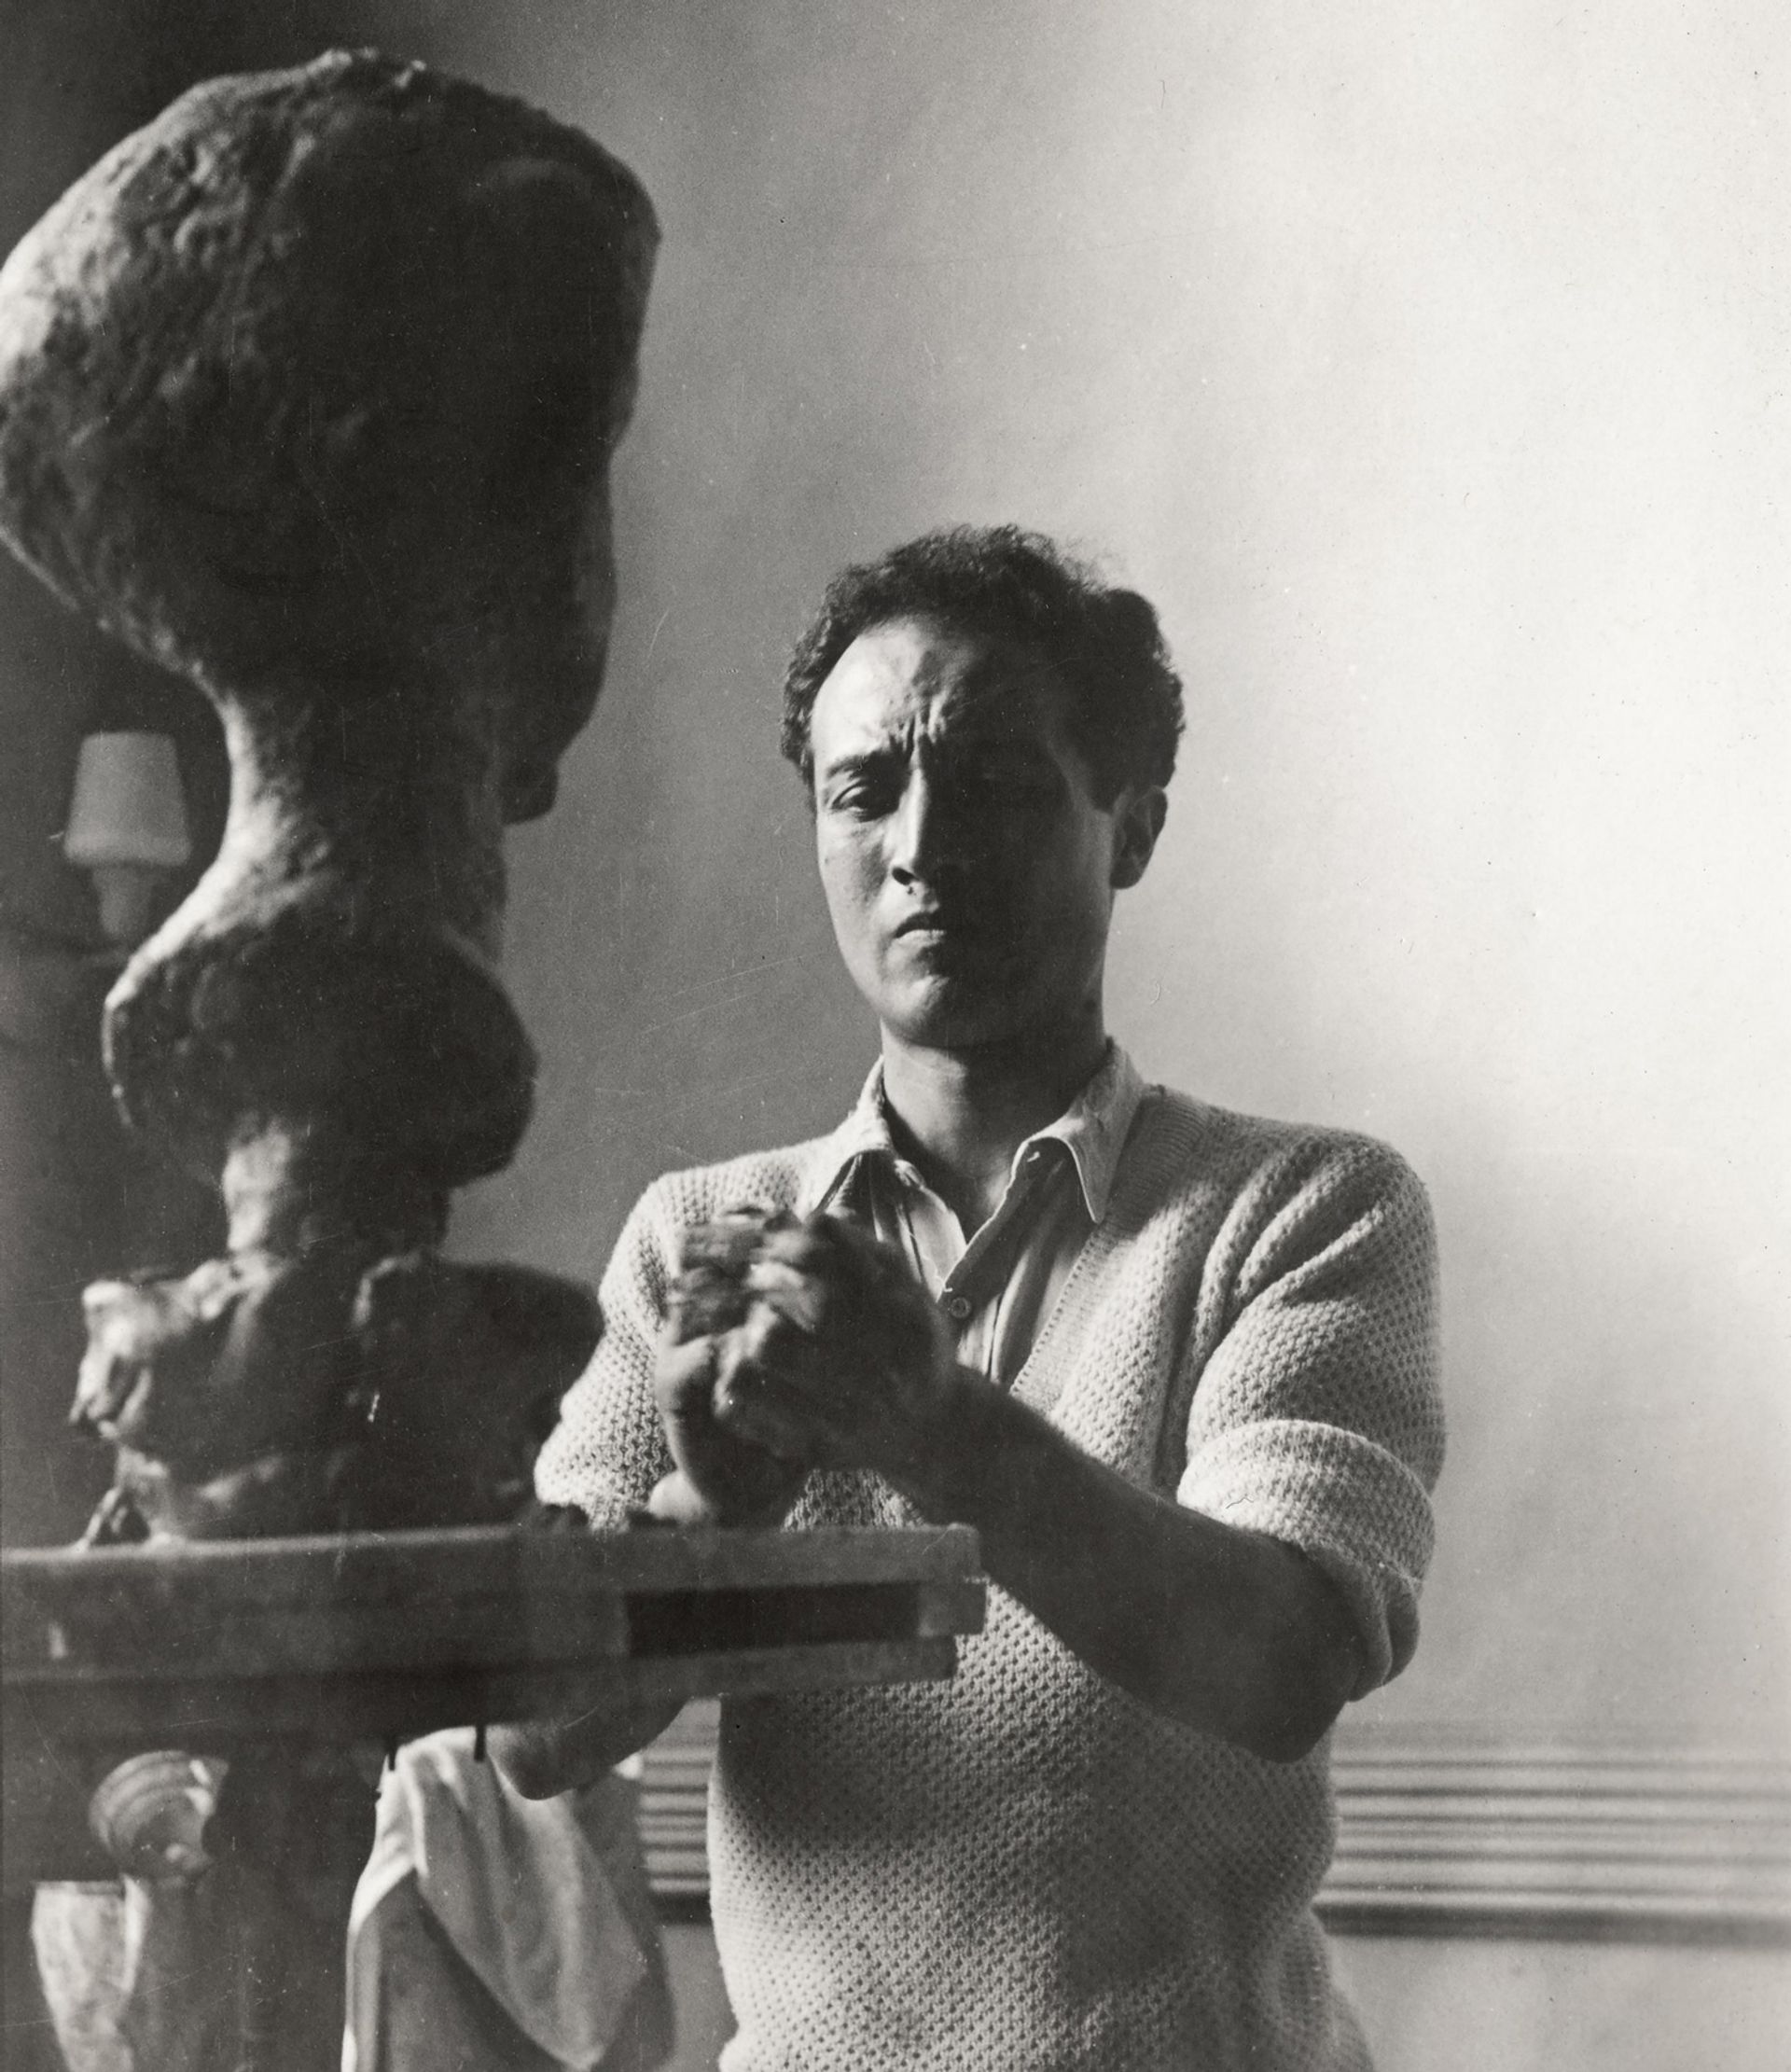 Isamu Noguchi working on a portrait of Mary Poore, 1932. ©INFGM / ARS